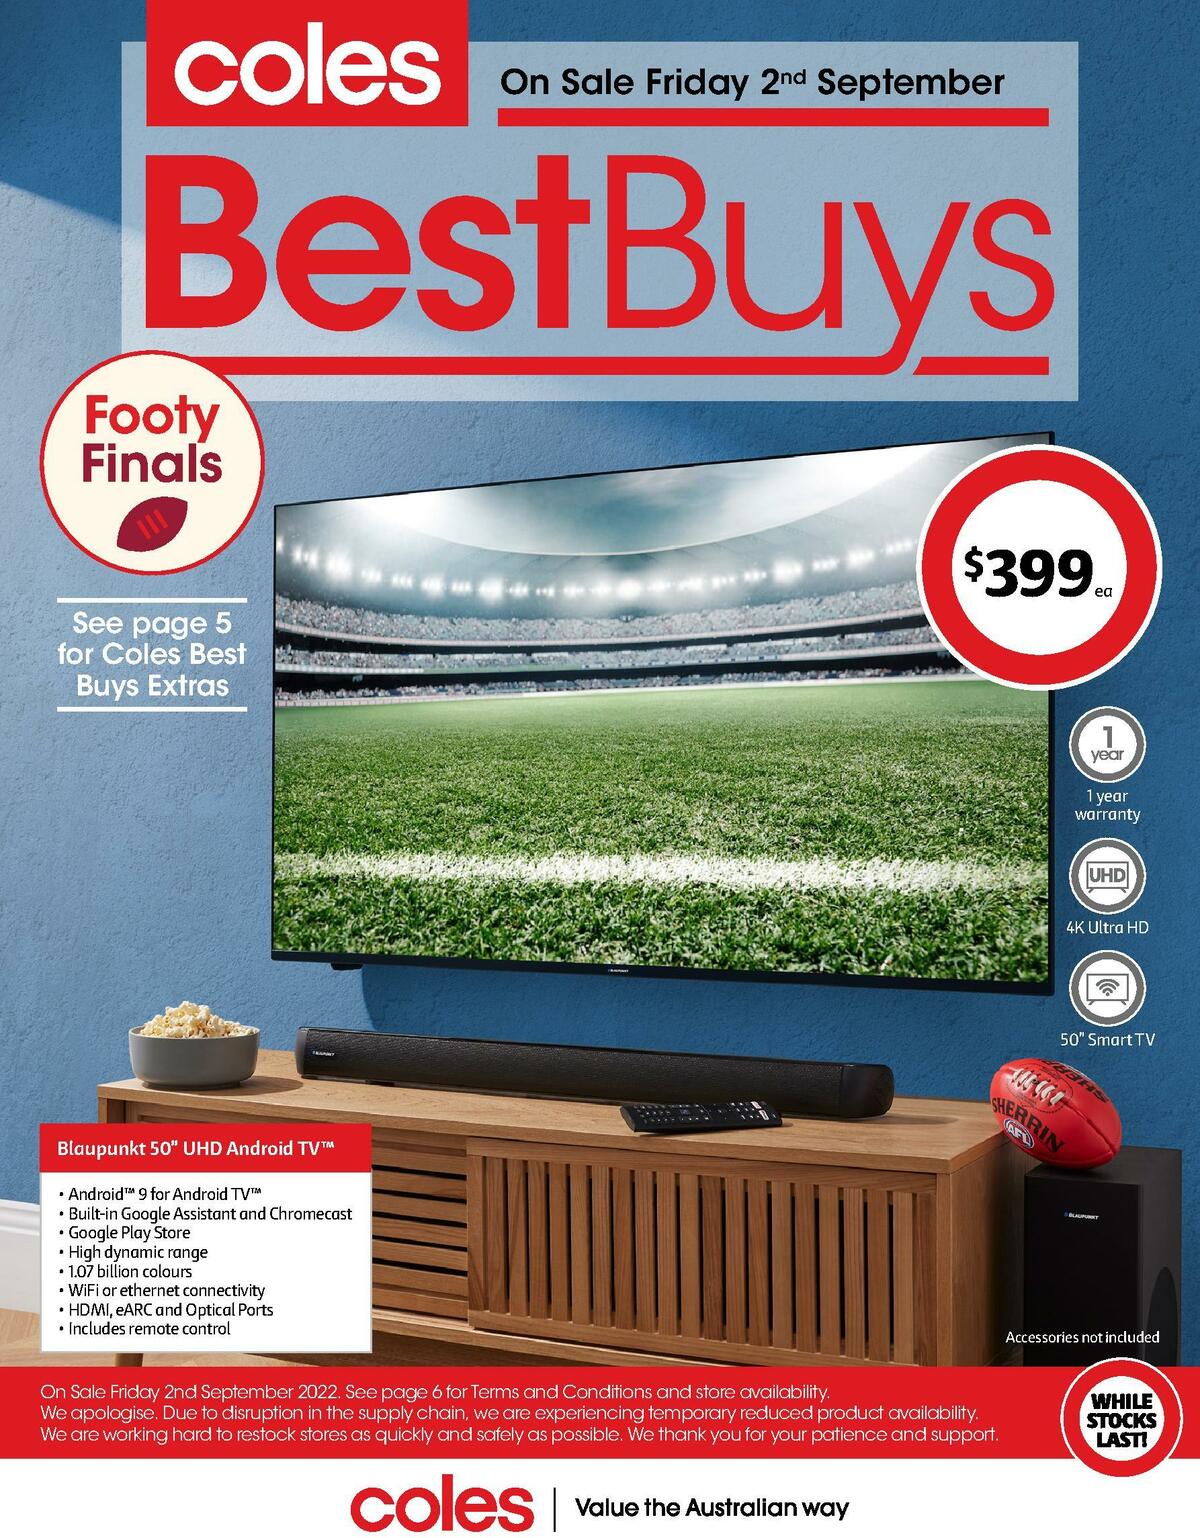 Coles Best Buys - Footy Finals Catalogues from 2 September